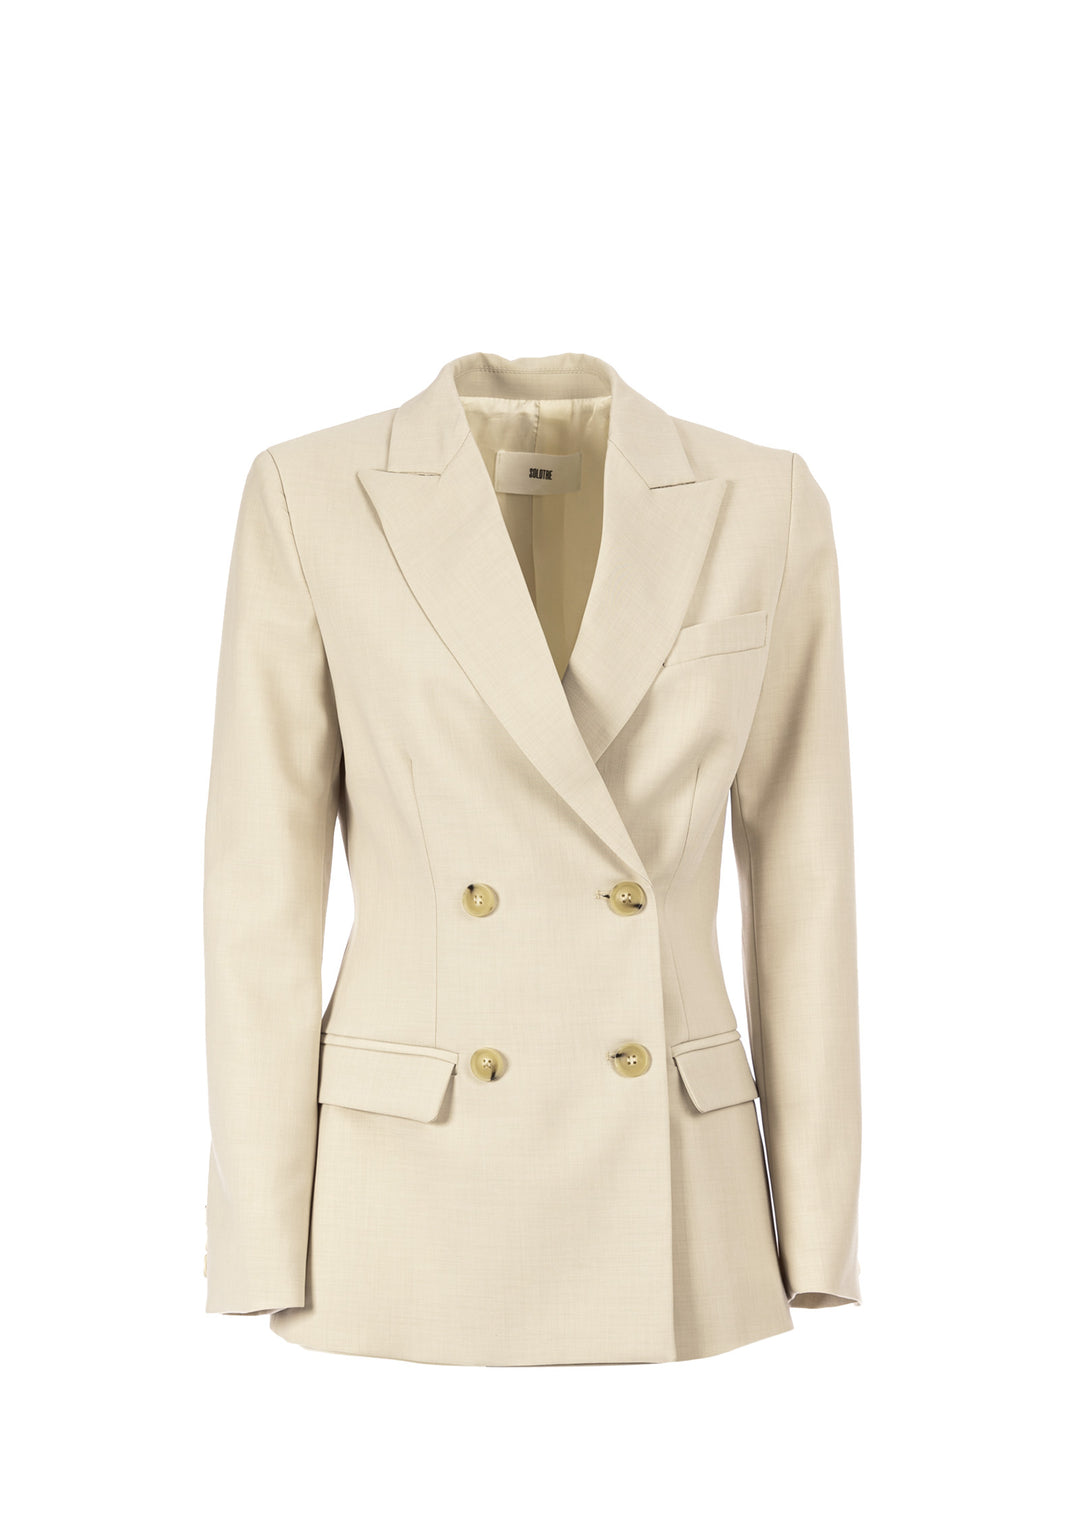 GIACCA DONNA Beige Solotre